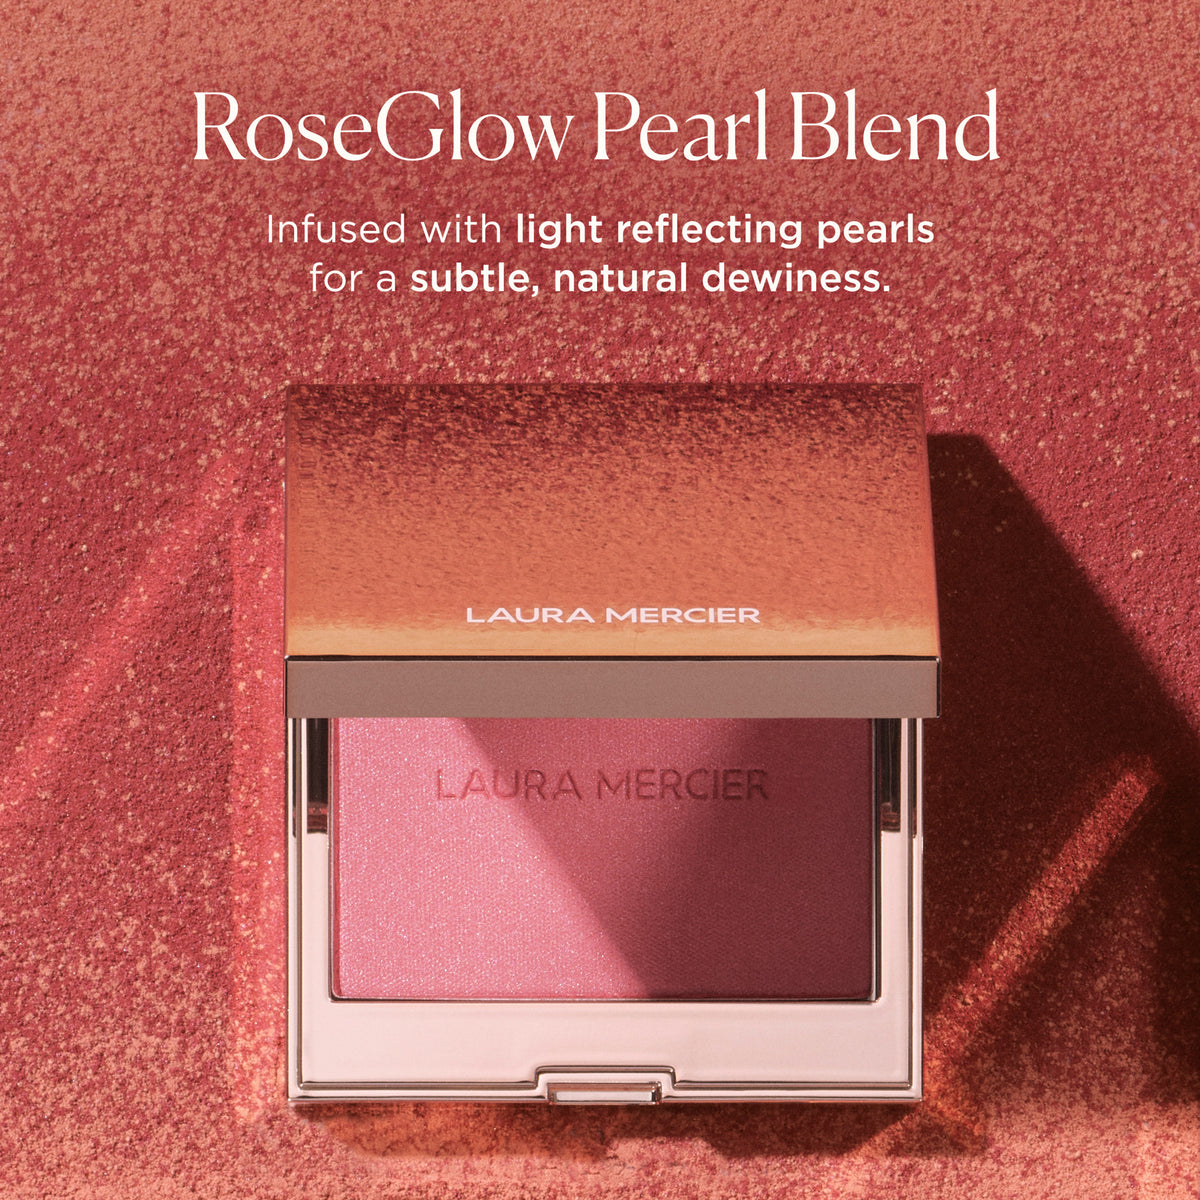 Laura Mercier RoseGlow Blush Color Infusion . This product is in the color nude